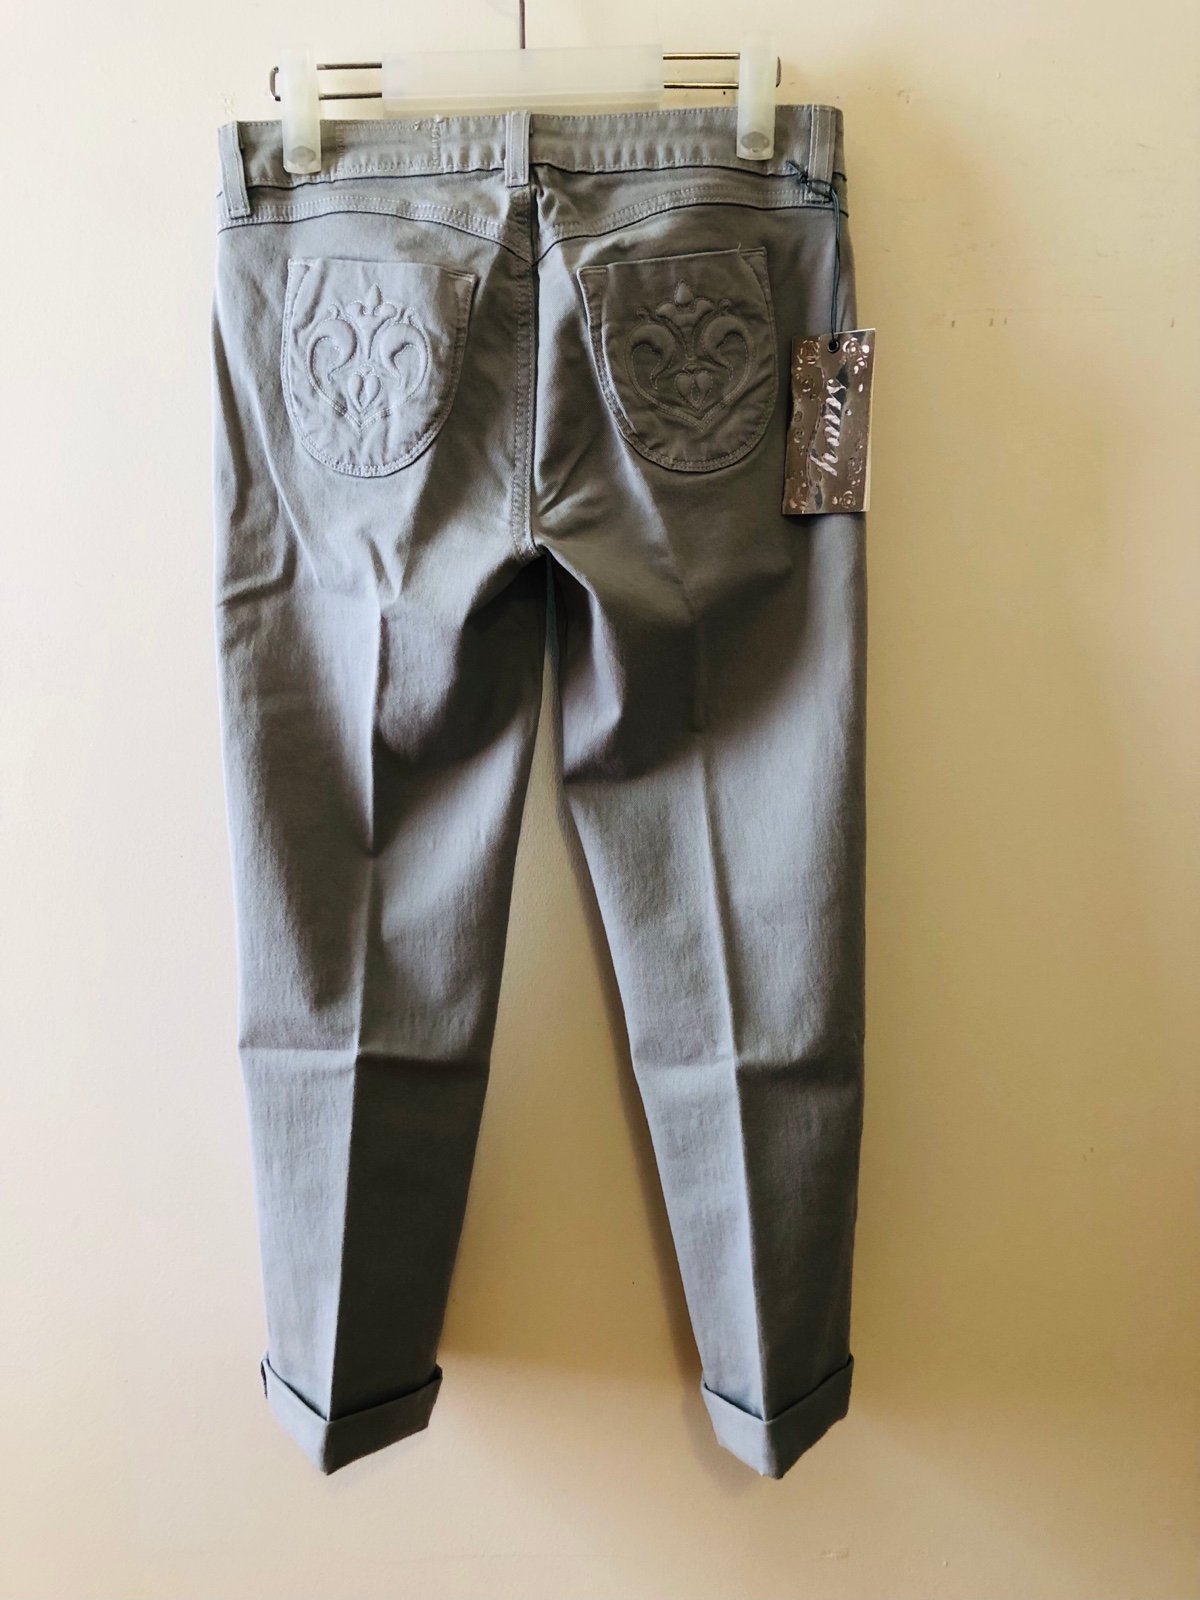 Affordable NEW Siwy Denim Women’s Cropped Pants NWT was $168.00 O0i8lz288 US Sale